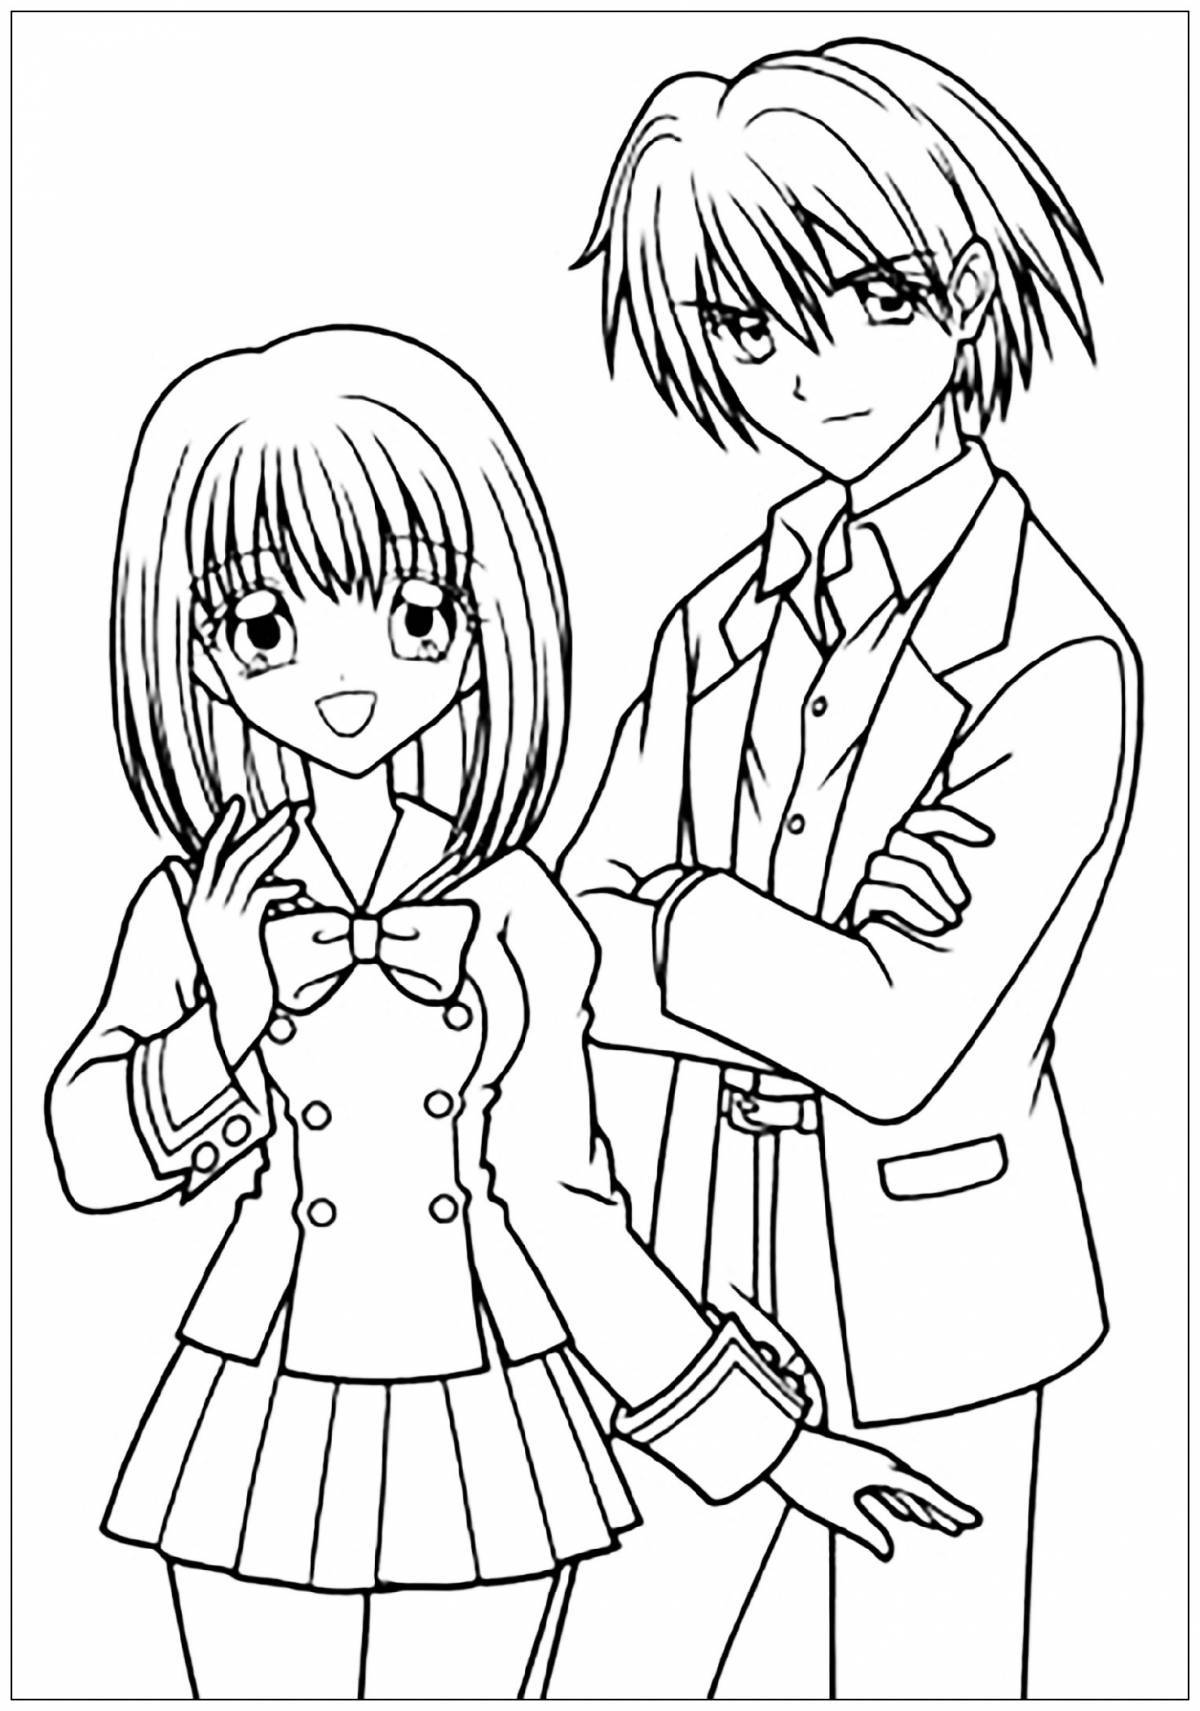 Great anime coloring book